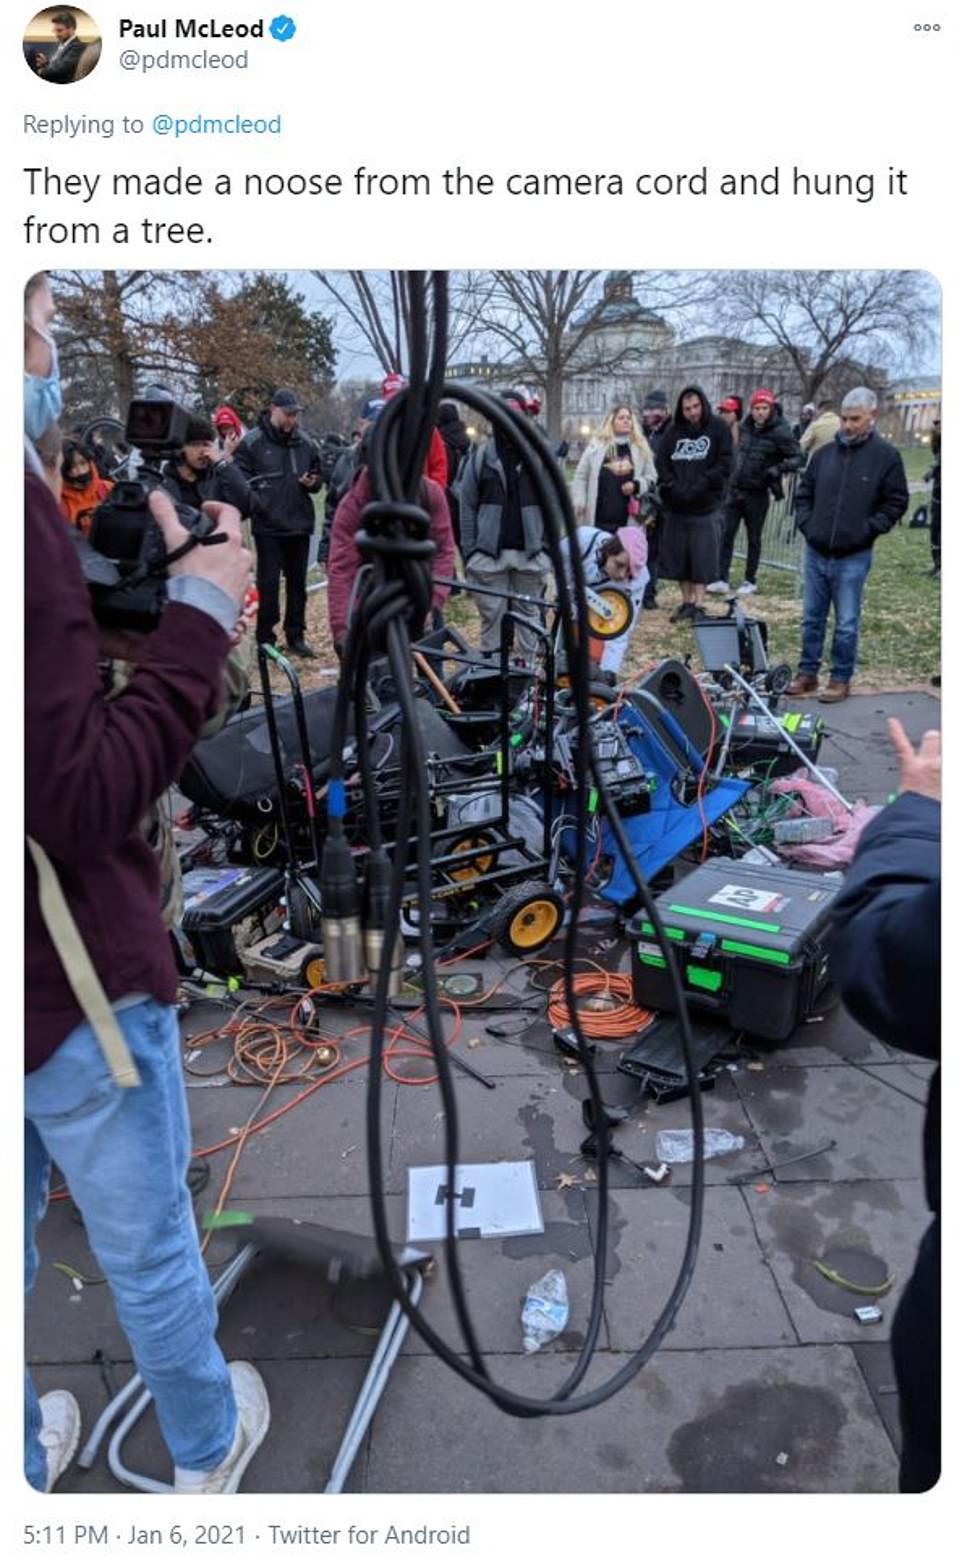 Some of the crowd then made a noose from the camera cord and hung it from a tree, according to Buzzfeed reporter Paul McLeod